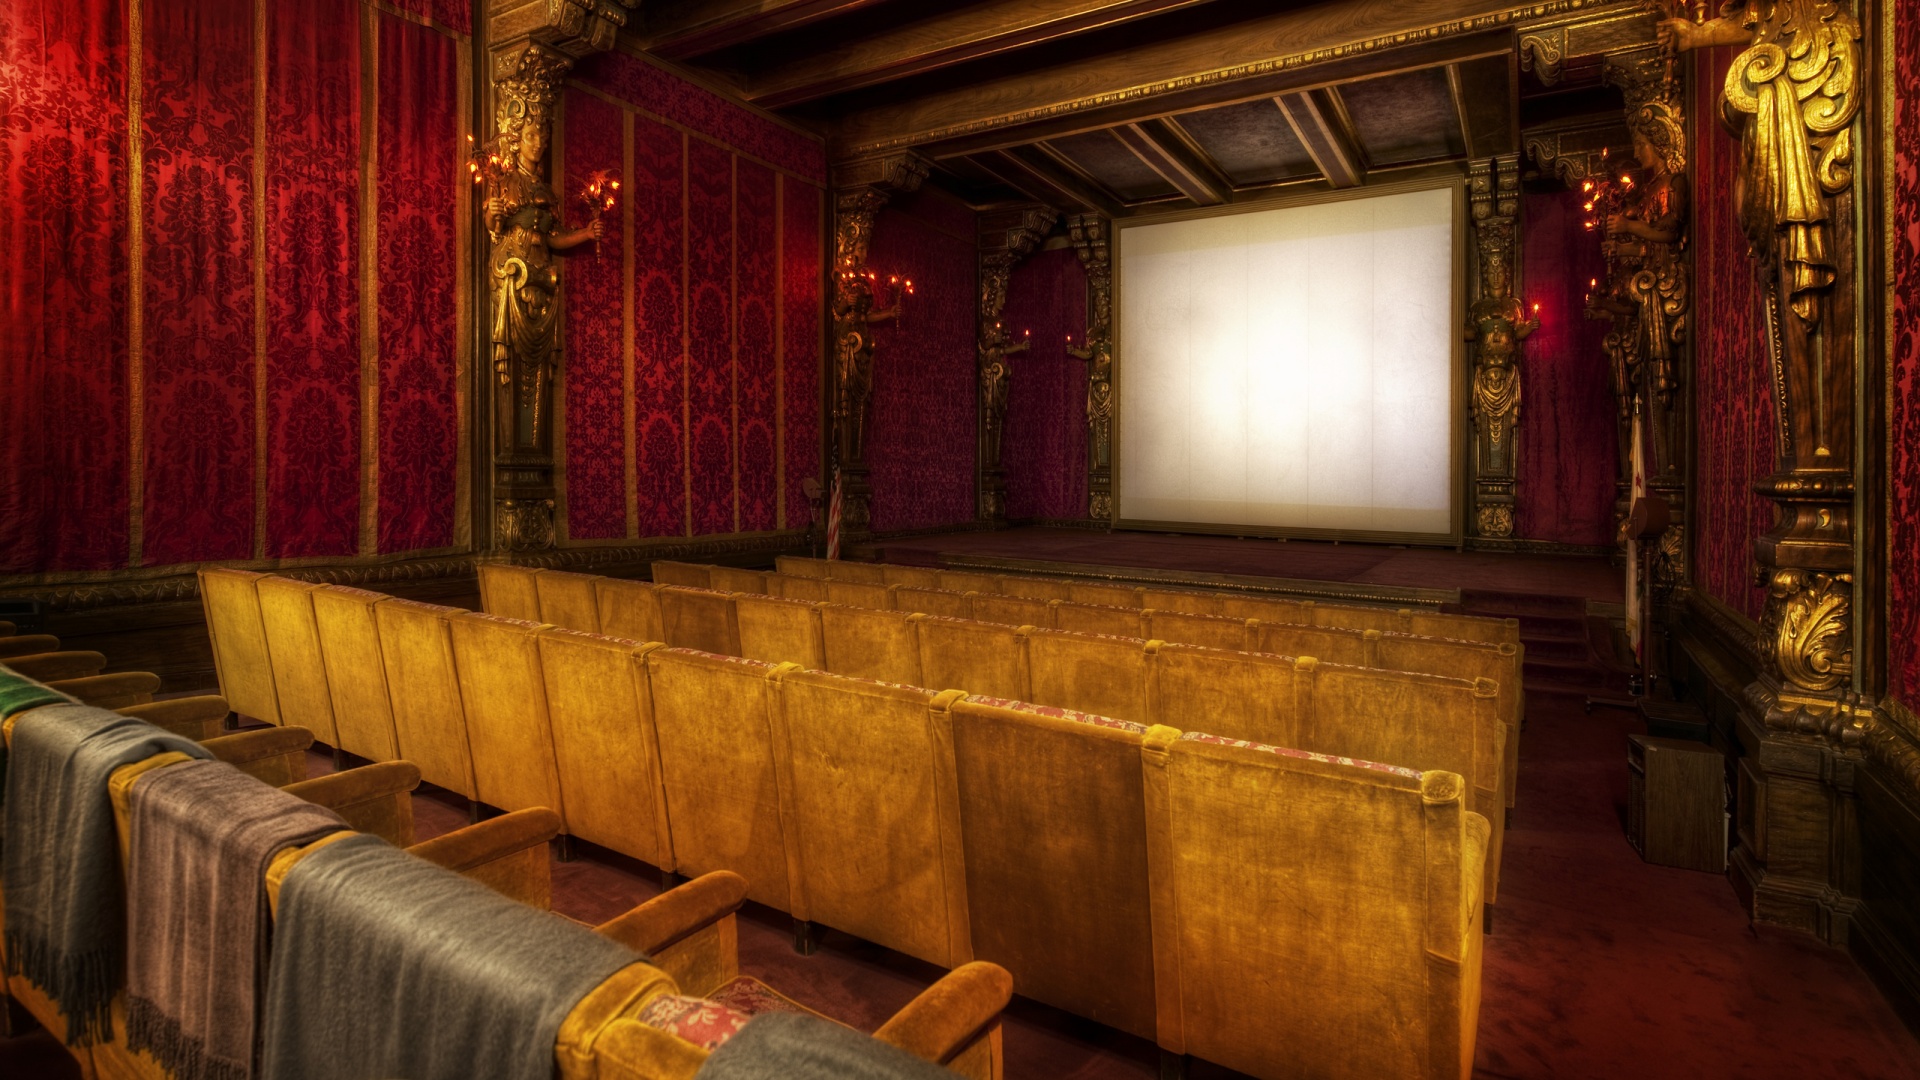 The Movie Theater At Hearst Desktop Wallpaper